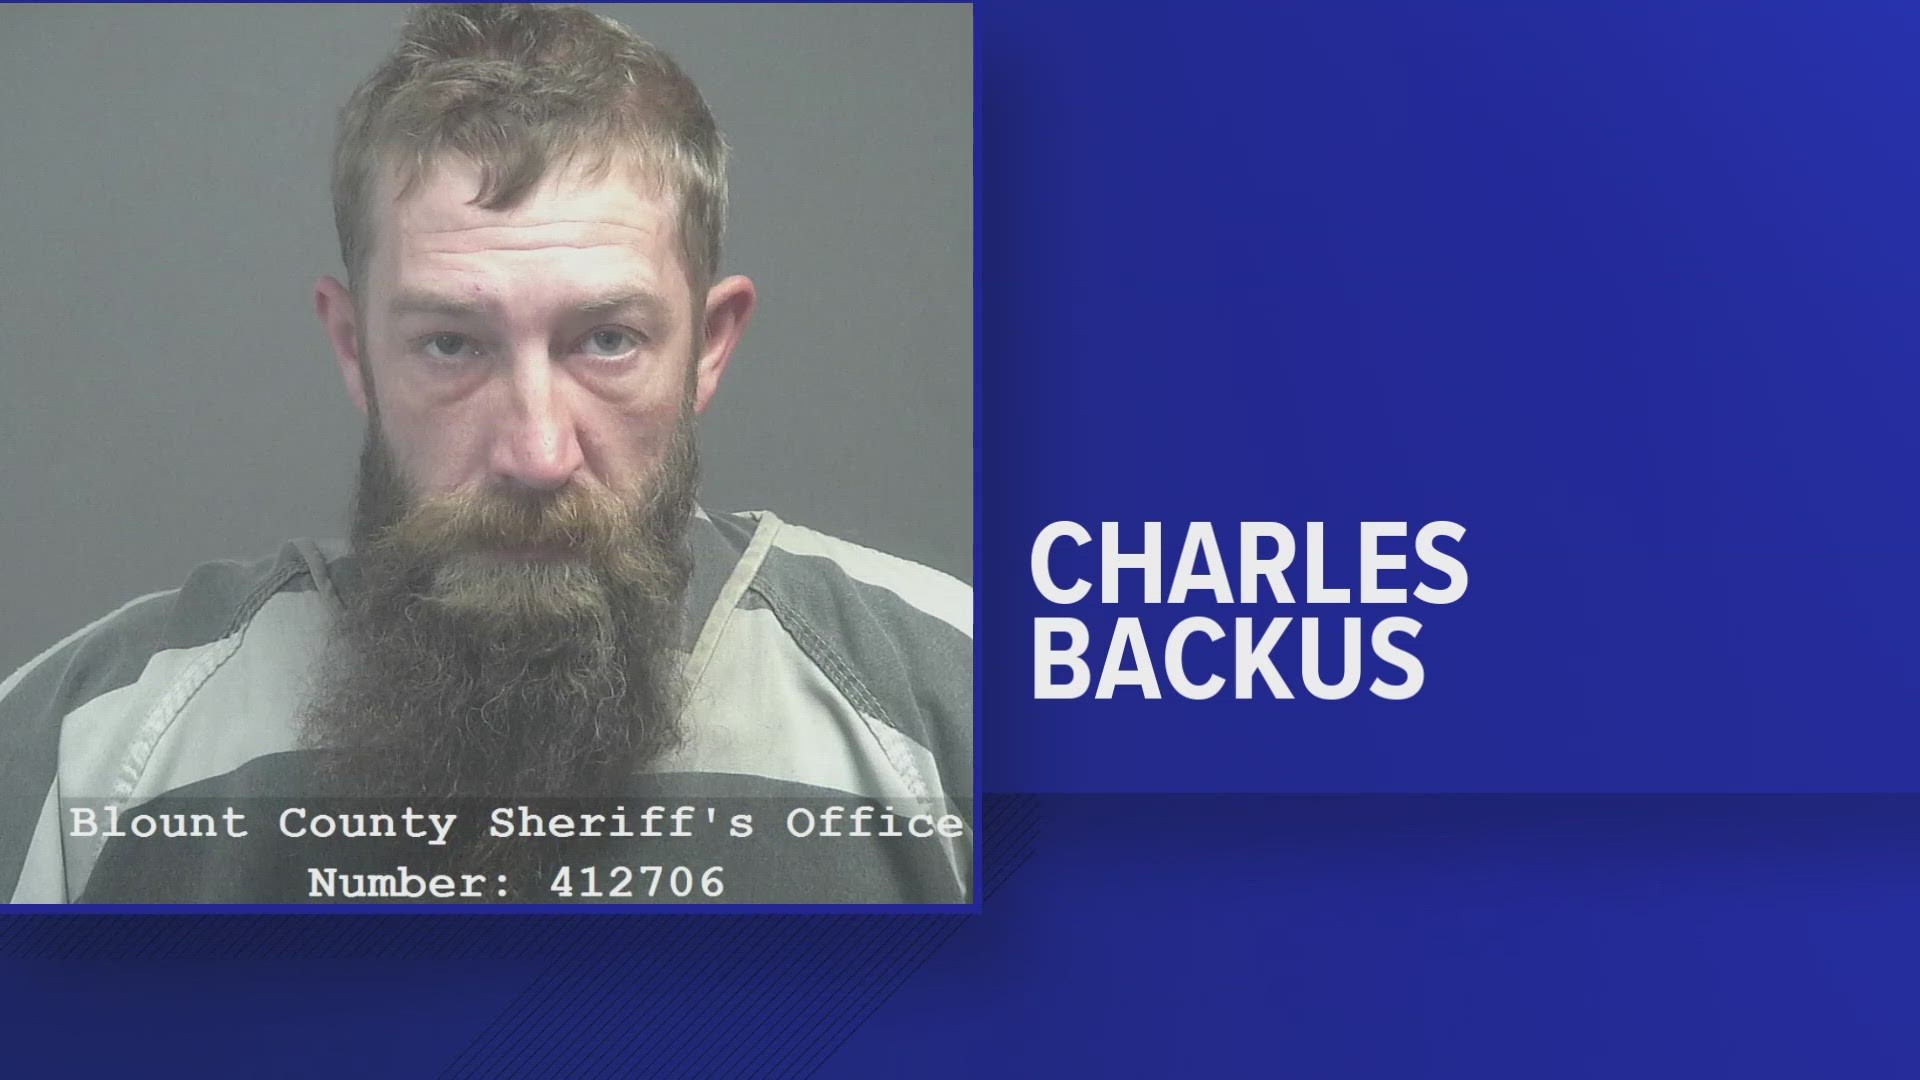 Deputies said the woman told them that Charles Backus, 41, drove to her home and tried to get items from an attic in the garage.